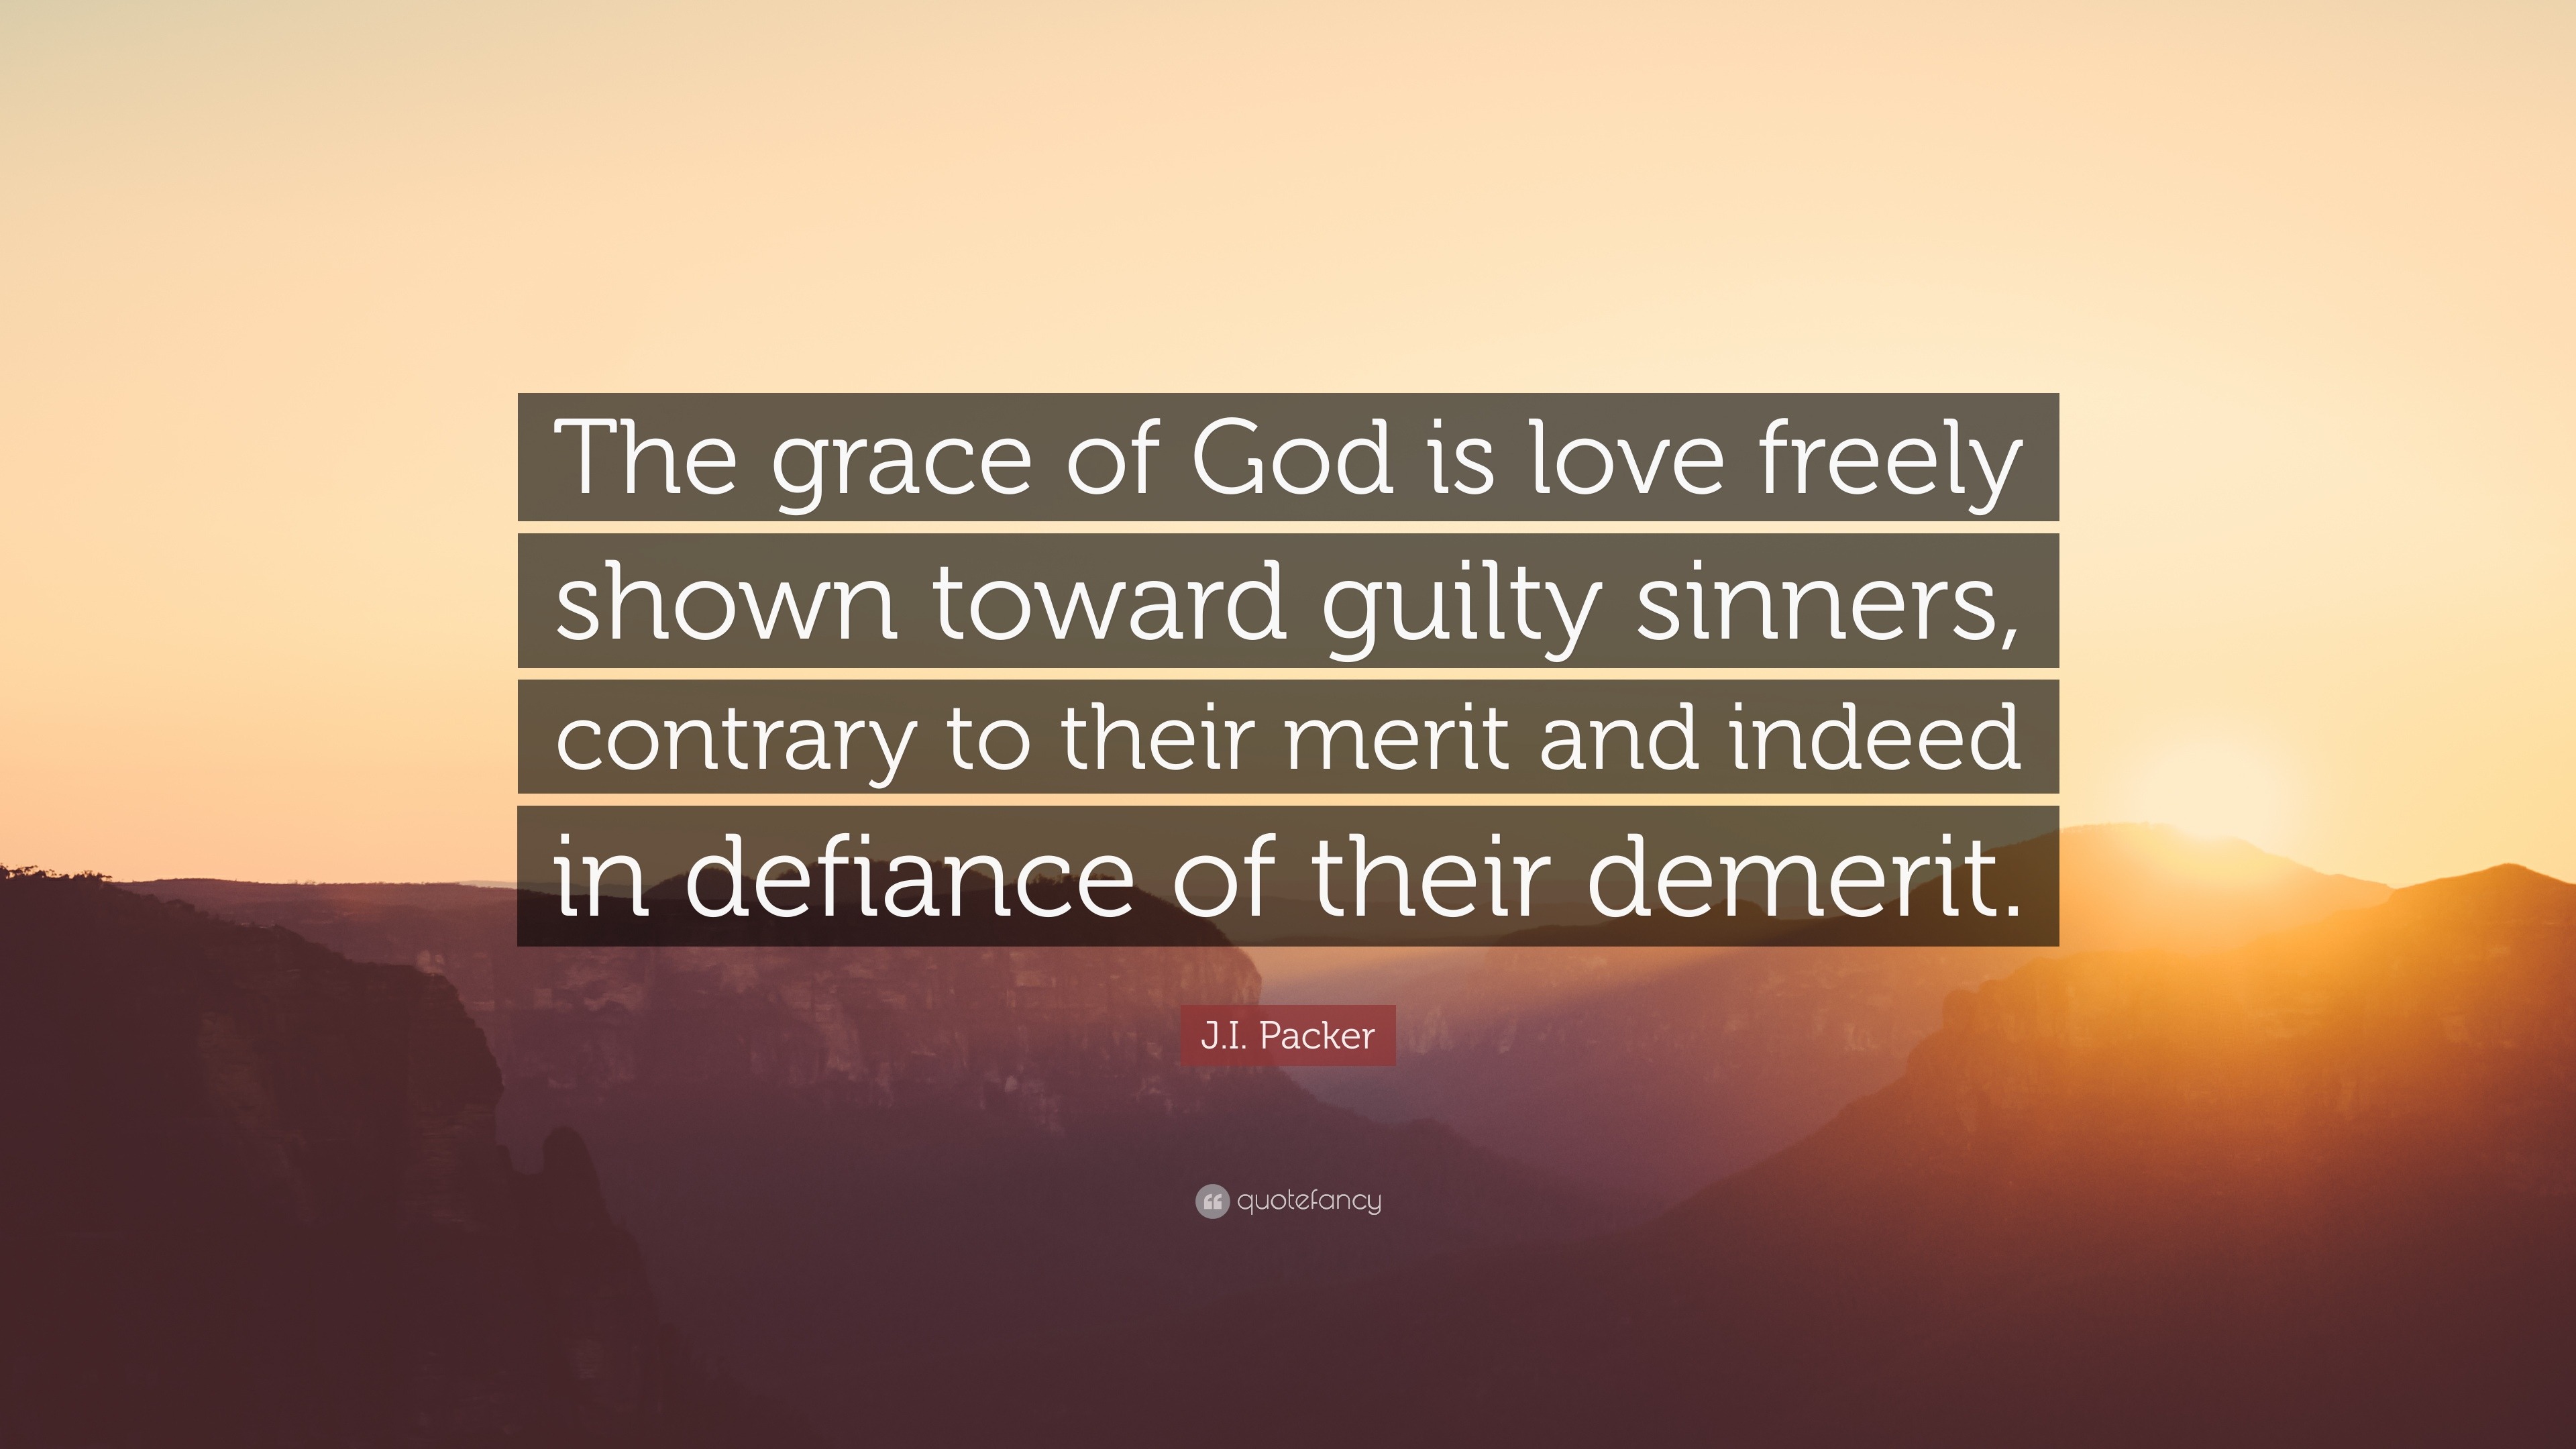 J I Packer Quote “The grace of God is love freely shown toward guilty sinners